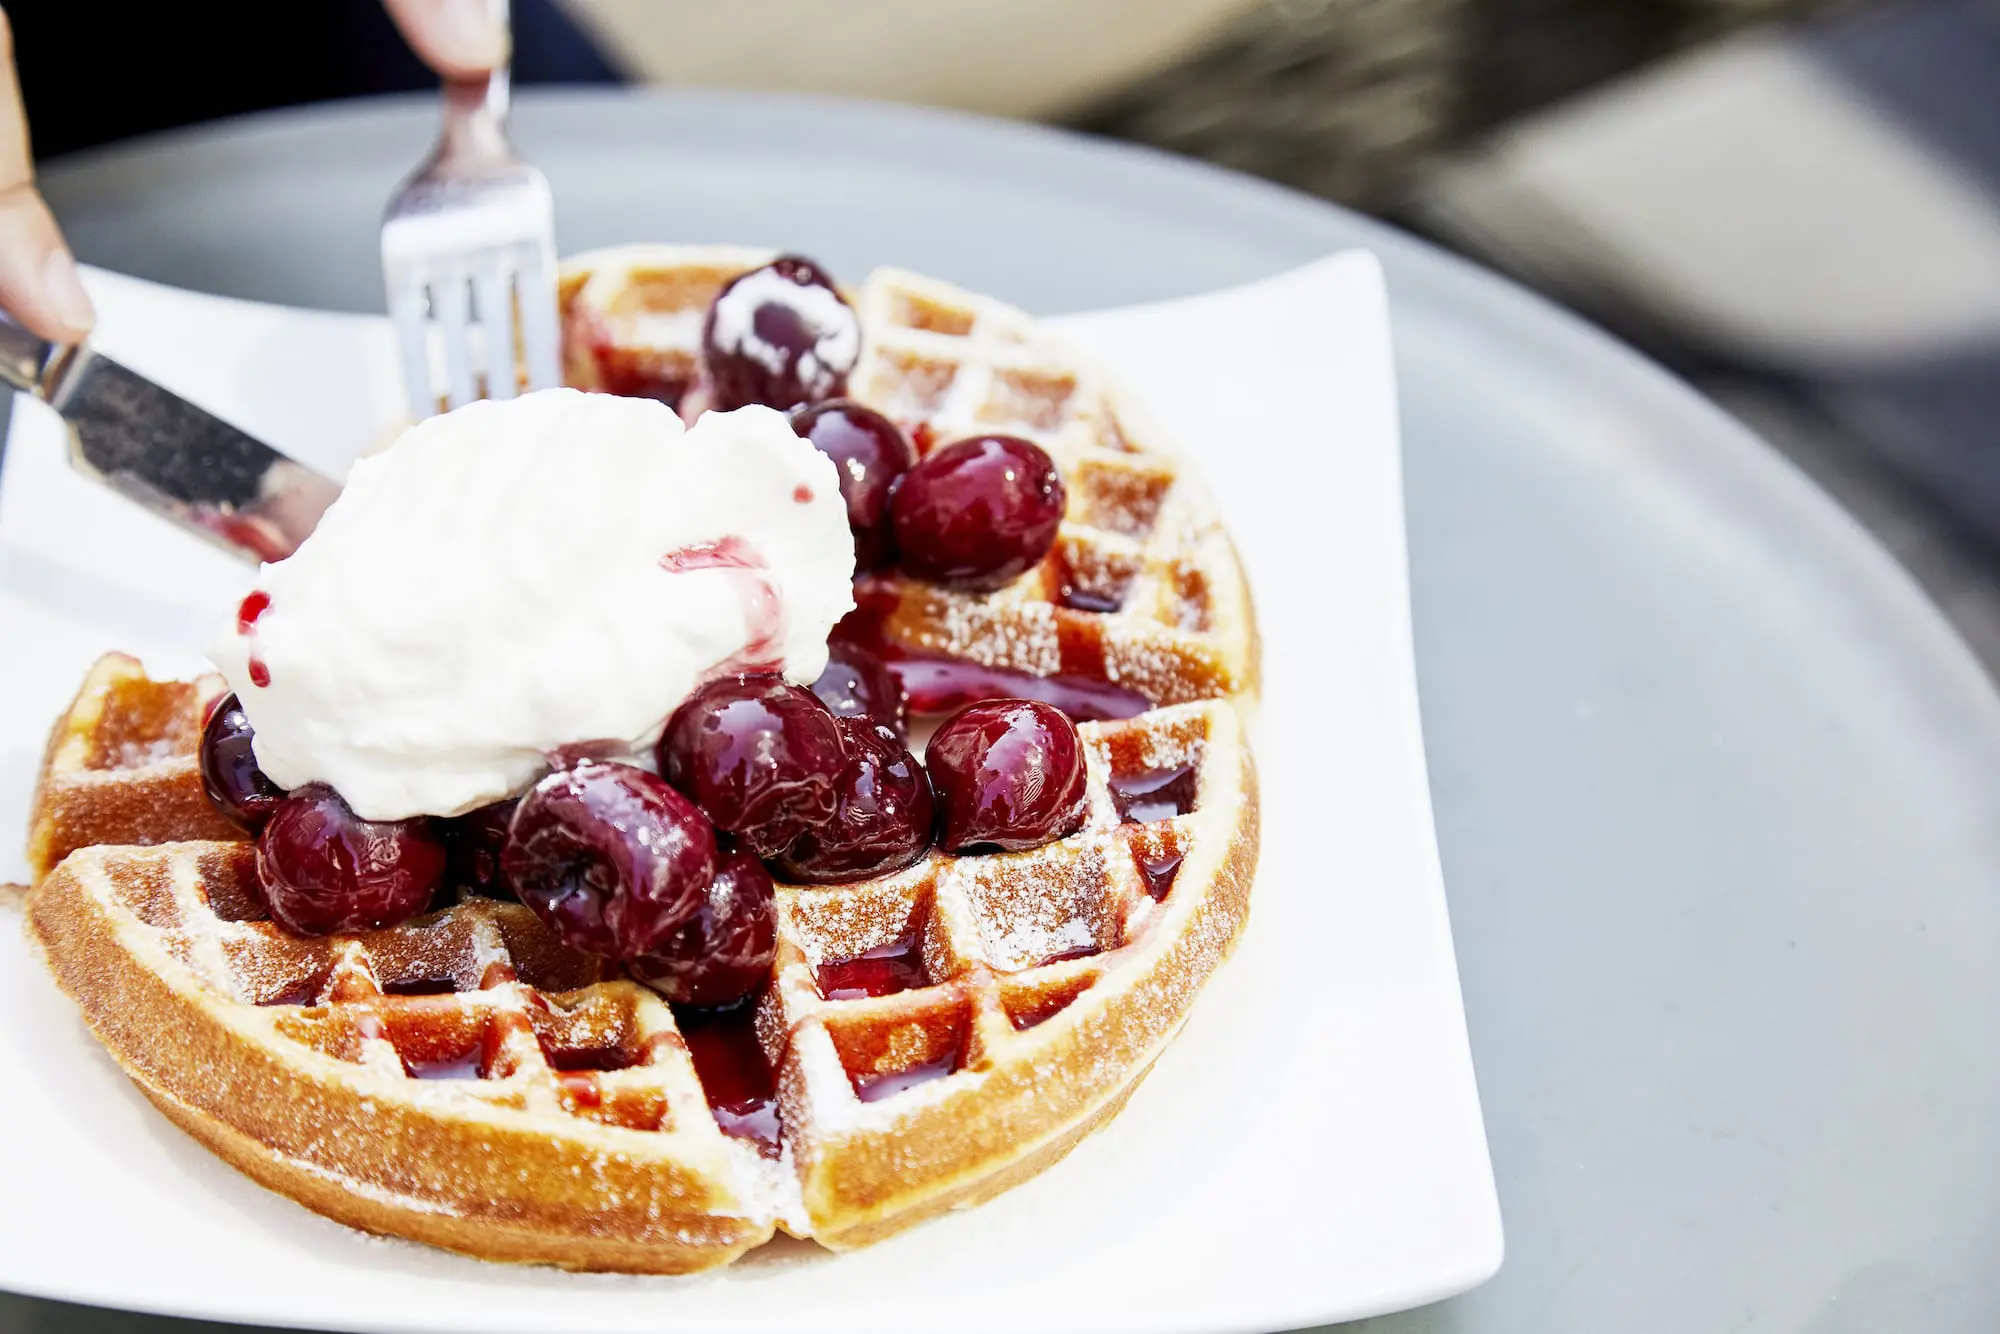 waffle, berries, and whipped cream